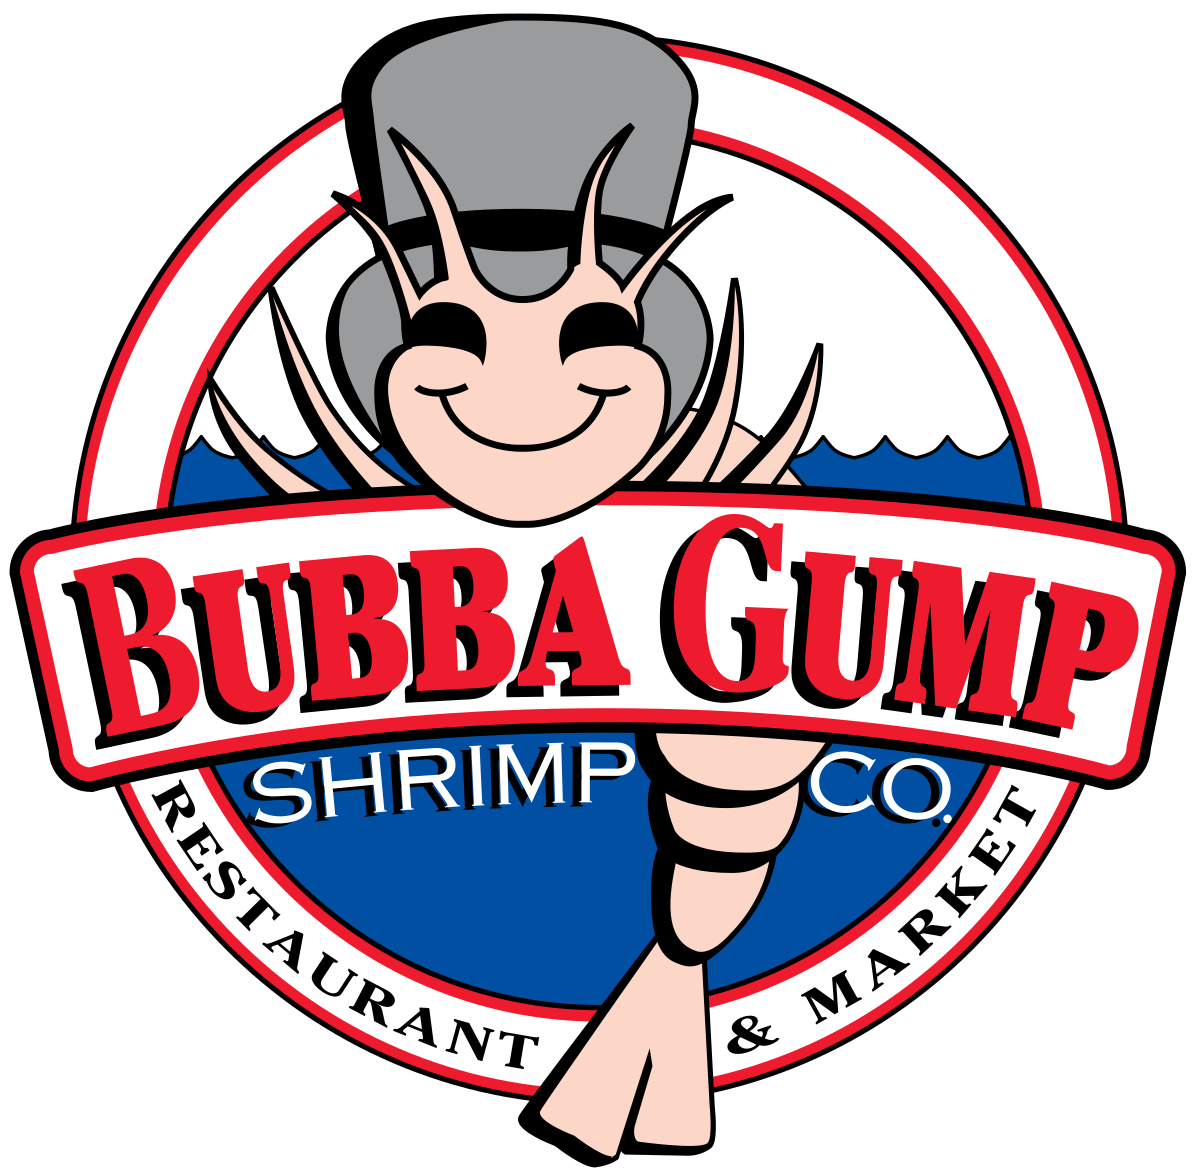 Restaurant Cleaners, cleaning services, professional cleaners, Cleaners NYC, NYC bar cleaners, NYC kitchen cleaners, Bubba Gump